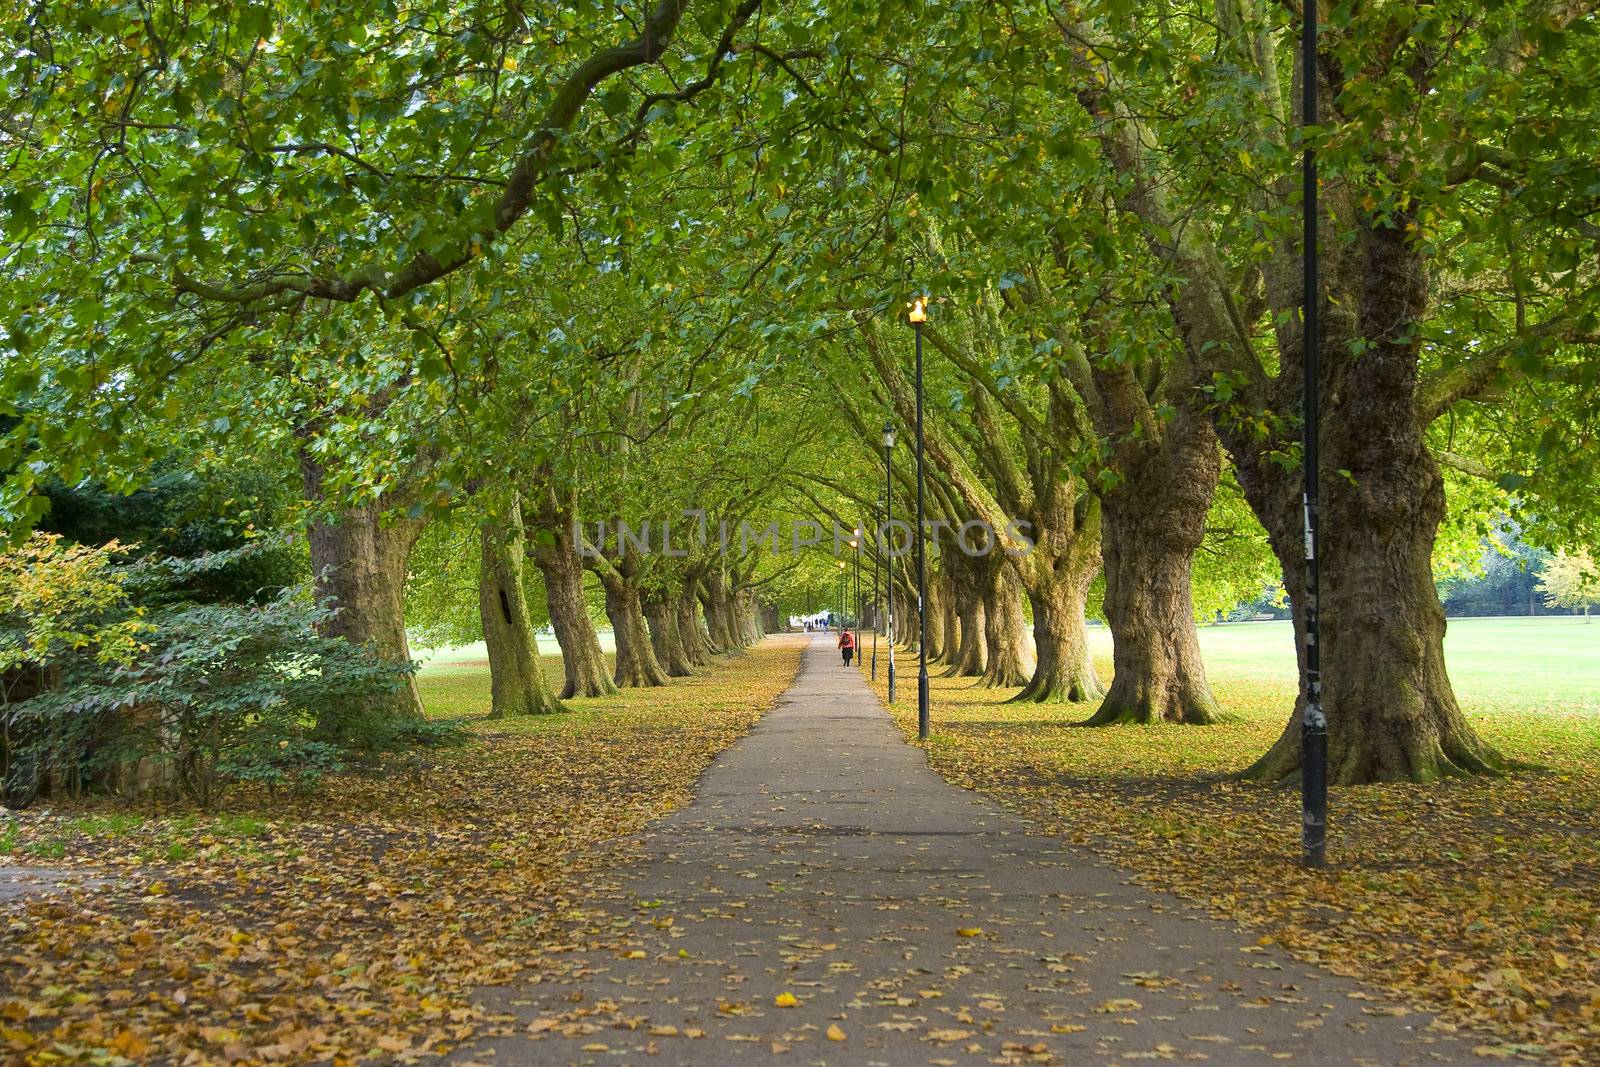 A beatiful pathway under the trees of Cambridge.